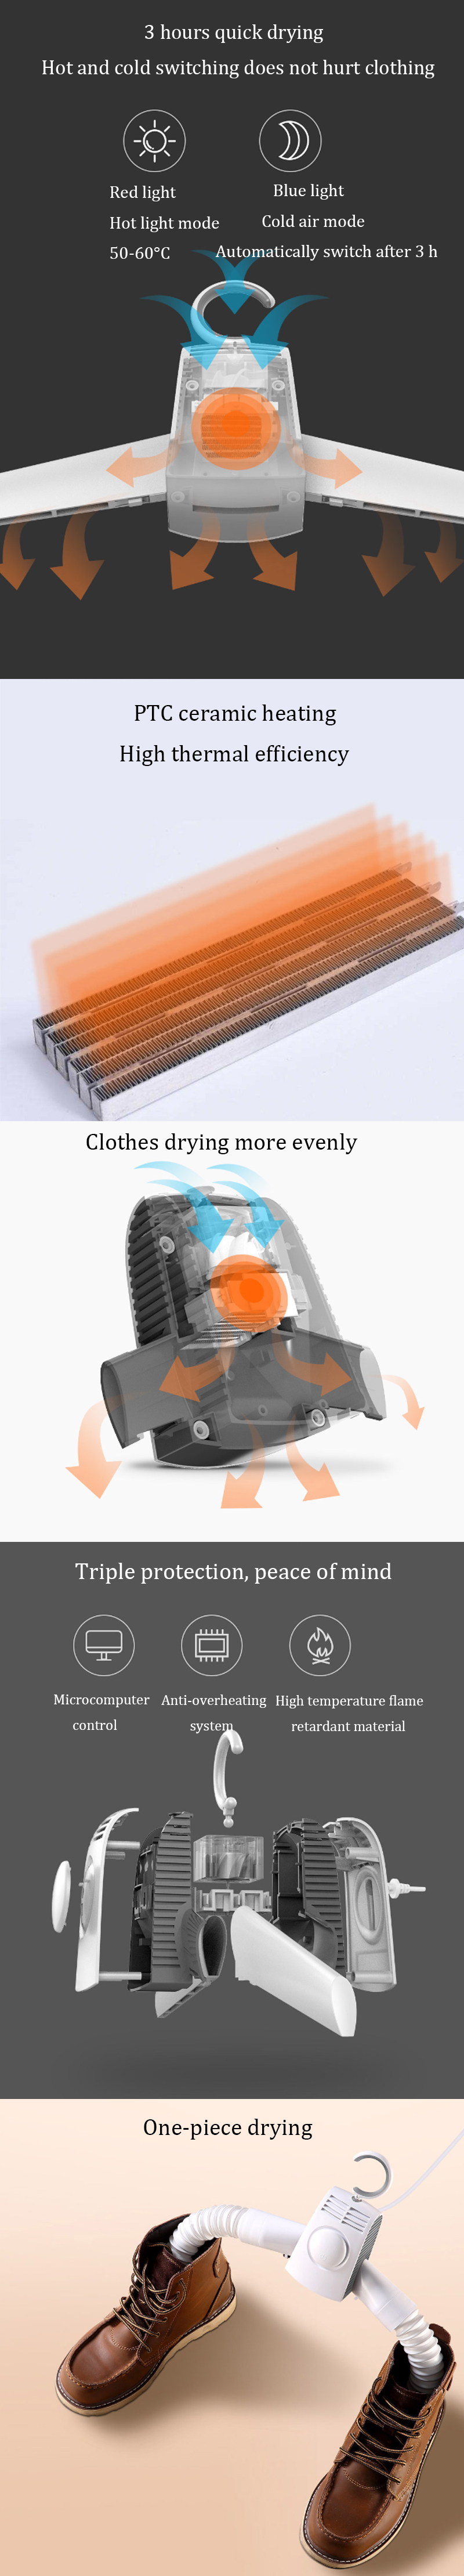 Xiaomi Smartfrog 150W 220V Electric Airer Clothes Dryer 3h Drying Folding Hanger Heater Machine Shoe Dryer Max Load 3kg Outdoor Travel 15